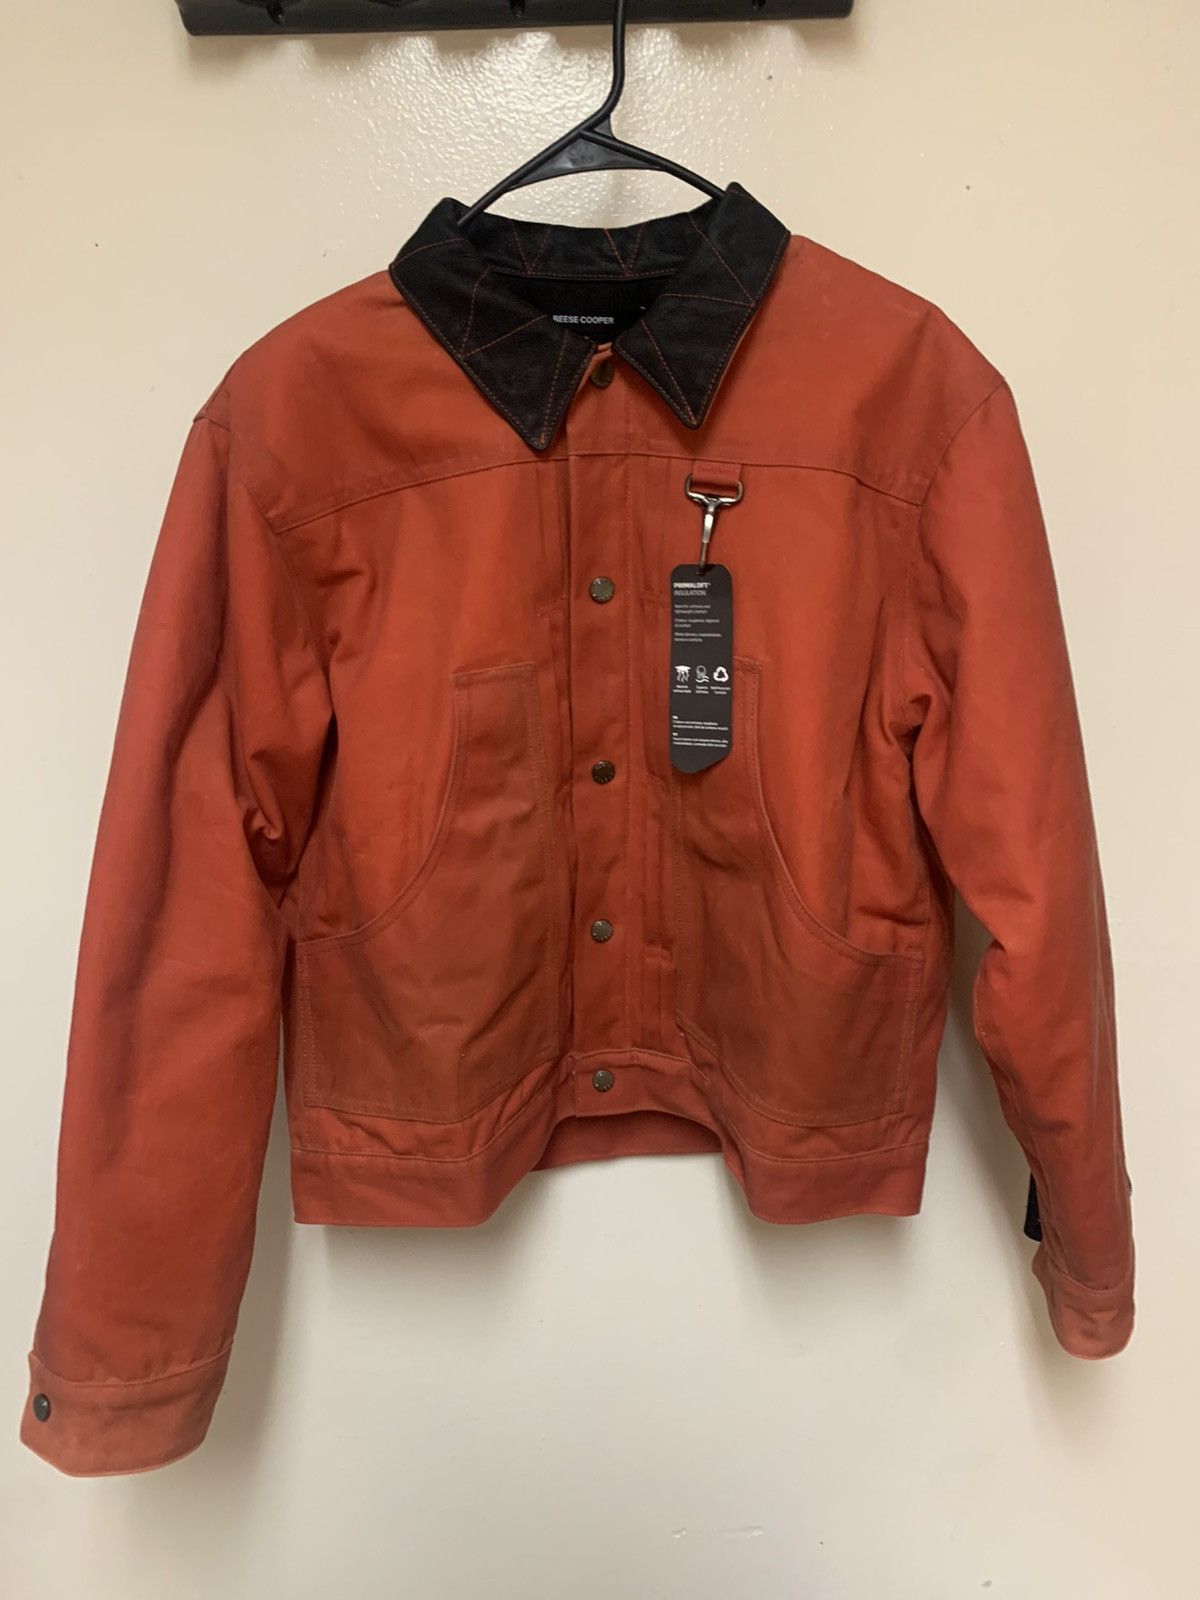 Reese Cooper Waxed Cotton Trucker Jacket | Grailed